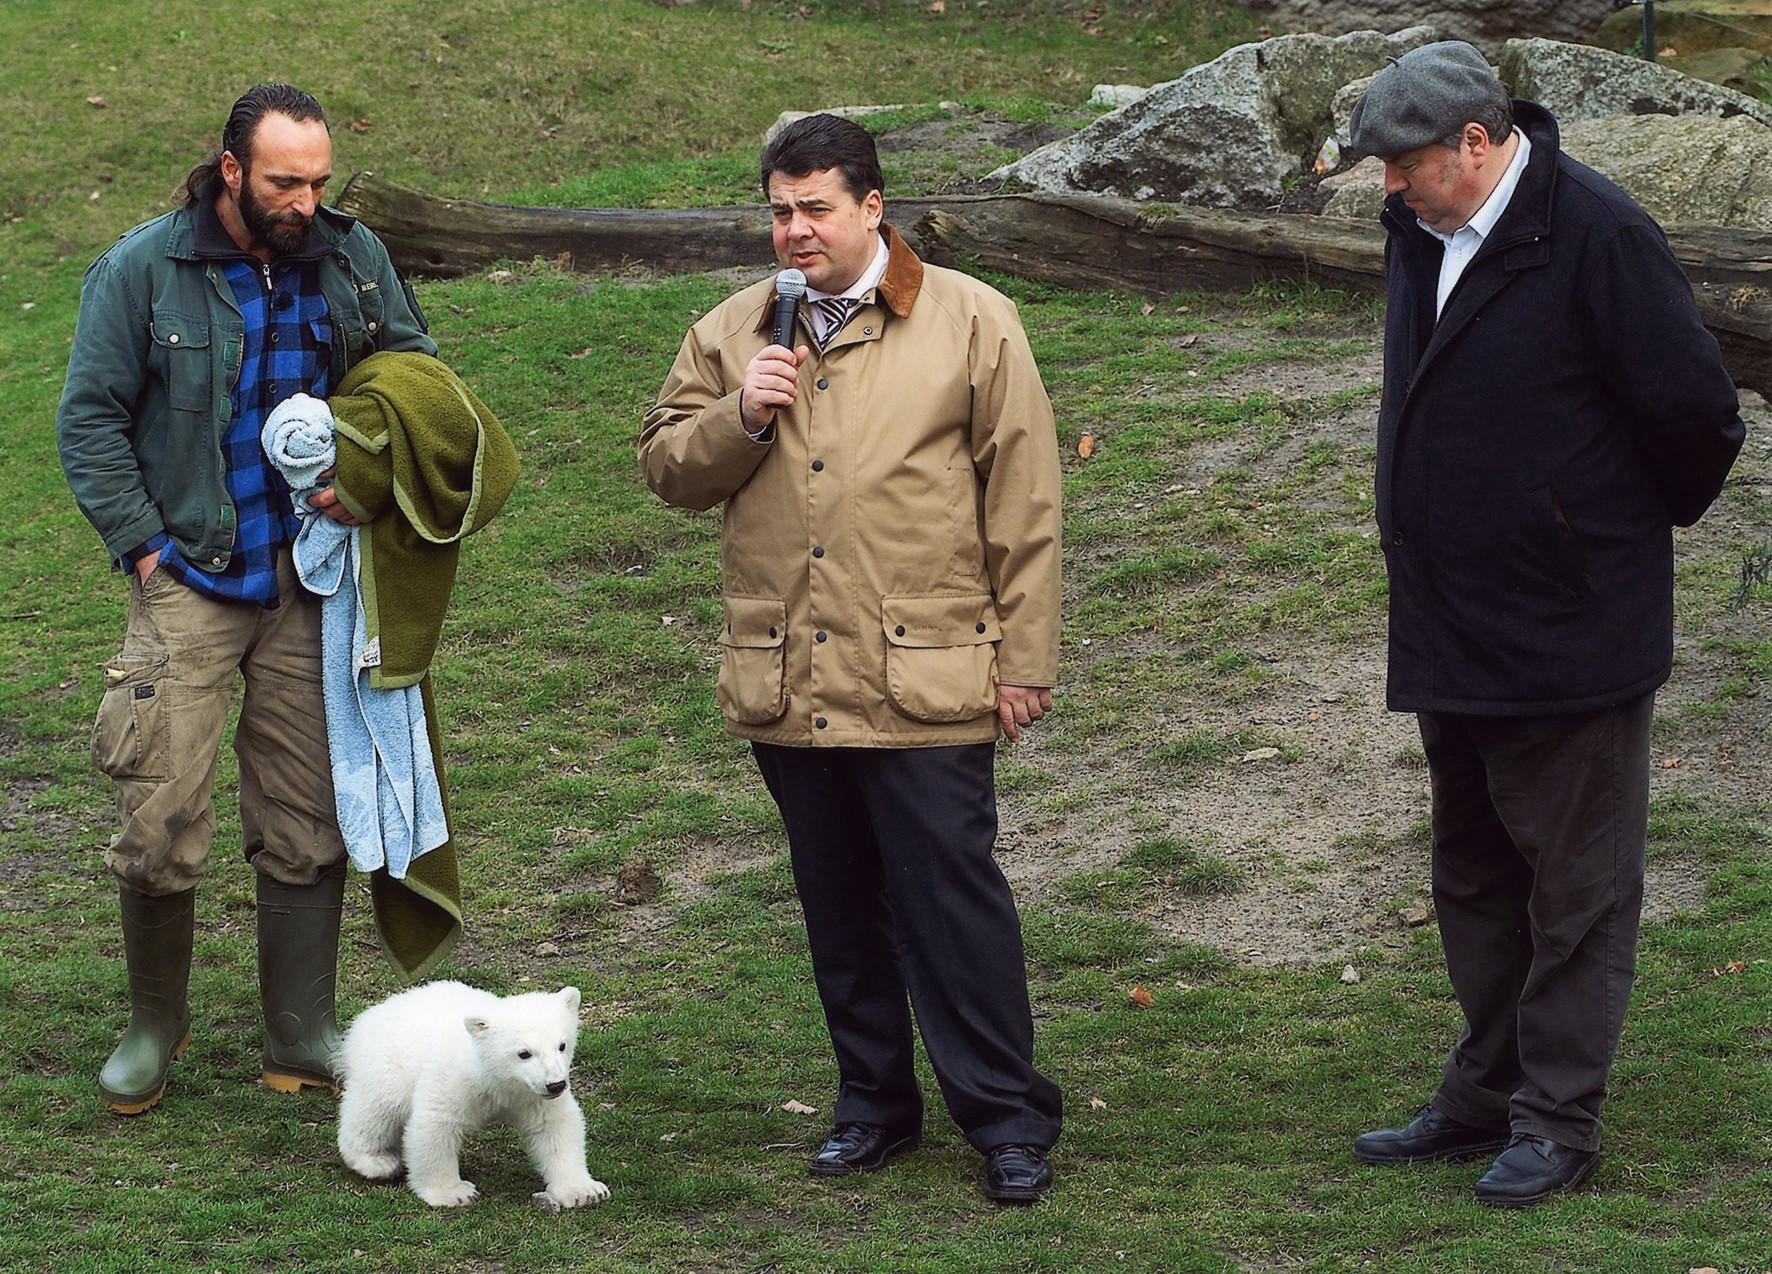 A bearded man on the left wearing the uniform and gumboots of a zookeeper stands on a lawn with a polar bear at his feet. At the centre, wearing a beige jacket, is a man with a microphone, to the right of him a man in dark clothing. The two people standing at the outside are turned towards the polar bear; the speaker is looking ahead.